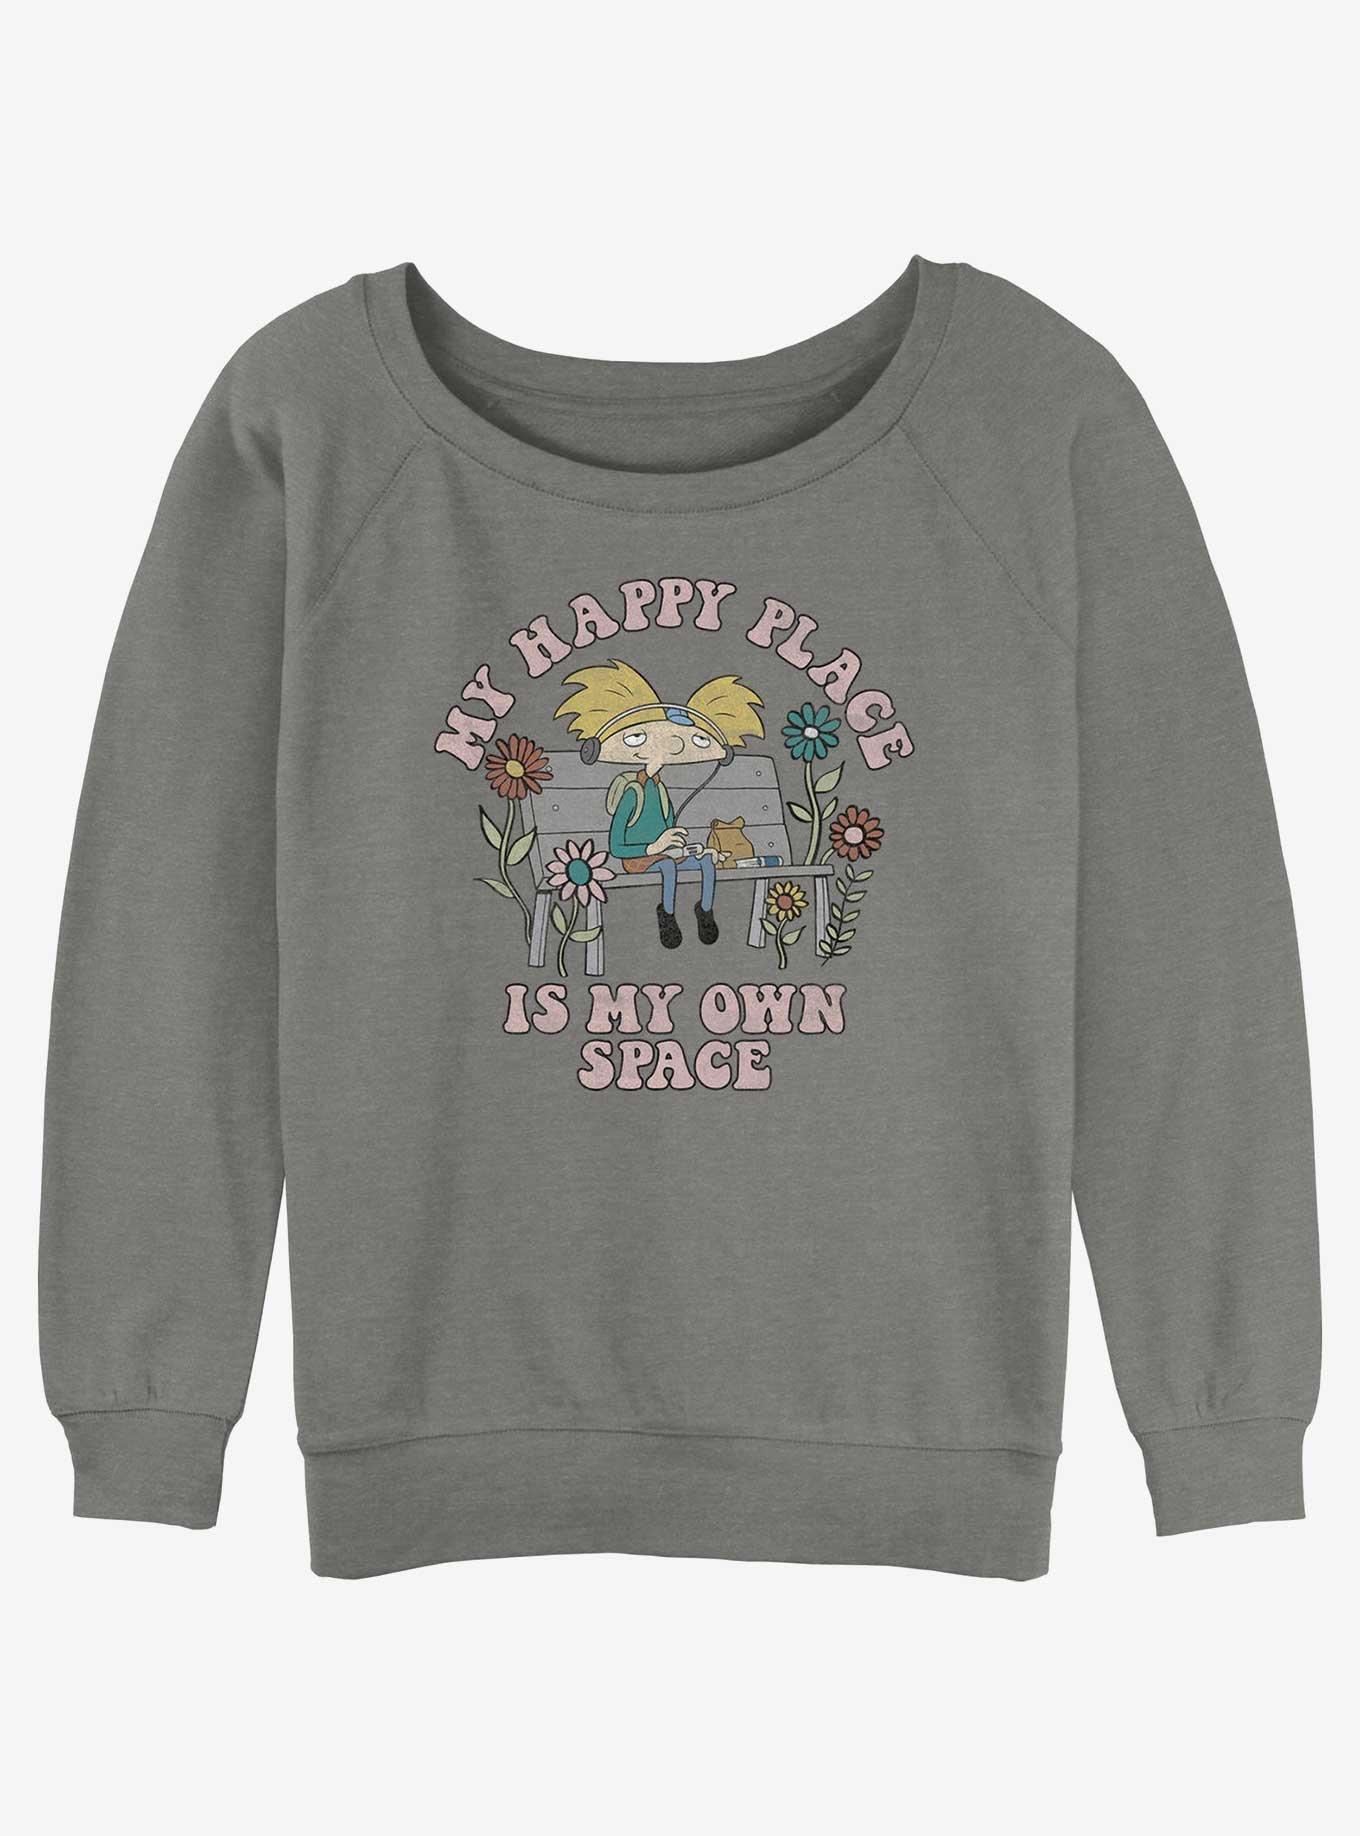 Nickelodeon Arnold My Happy Place Girls Slouchy Sweatshirt, GRAY HTR, hi-res